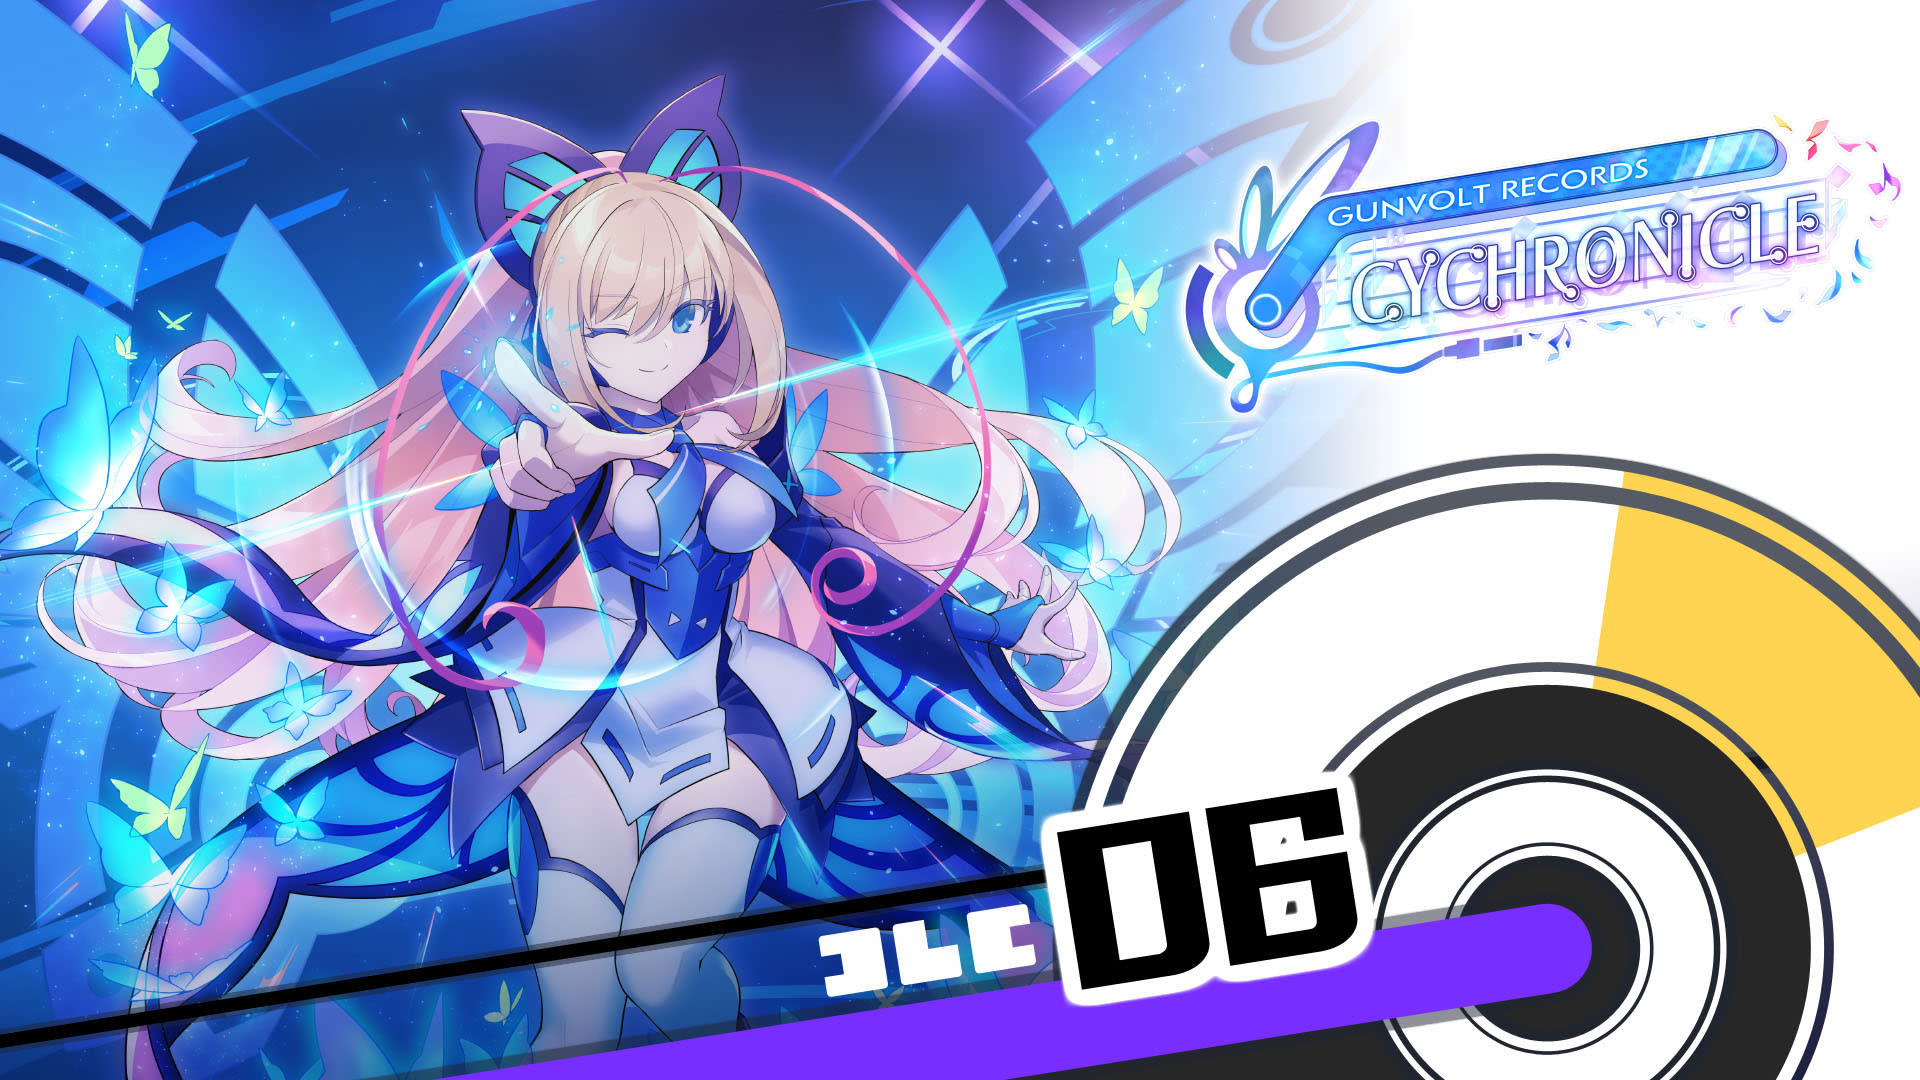 GUNVOLT RECORDS Cychronicle Song Pack 6 Lumen & Luxia: ♪Nebulous Clock ♪Iolite ♪Paradox Stage ♪Afsān 1